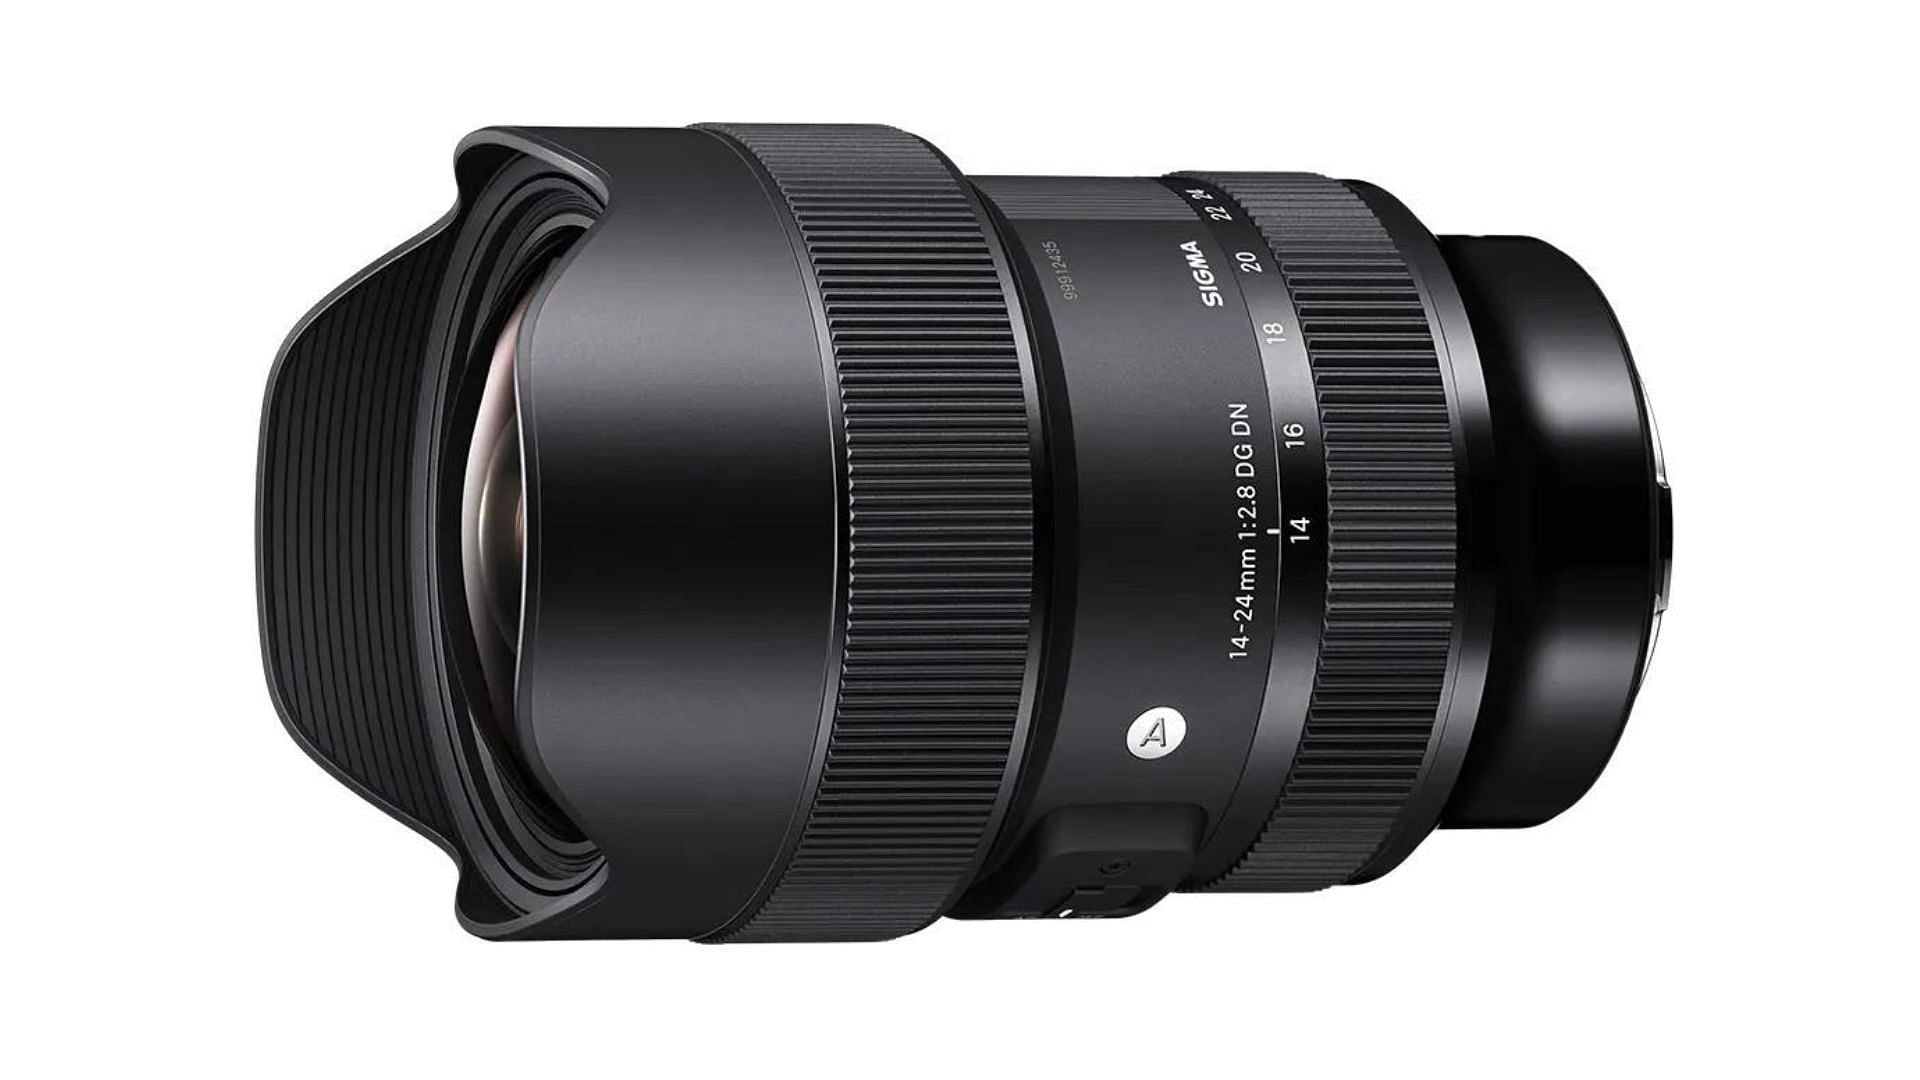 Sigma 14-24mm F2.8 DG DN is one of the best lenses for Nikon cameras (Image via Sigma)